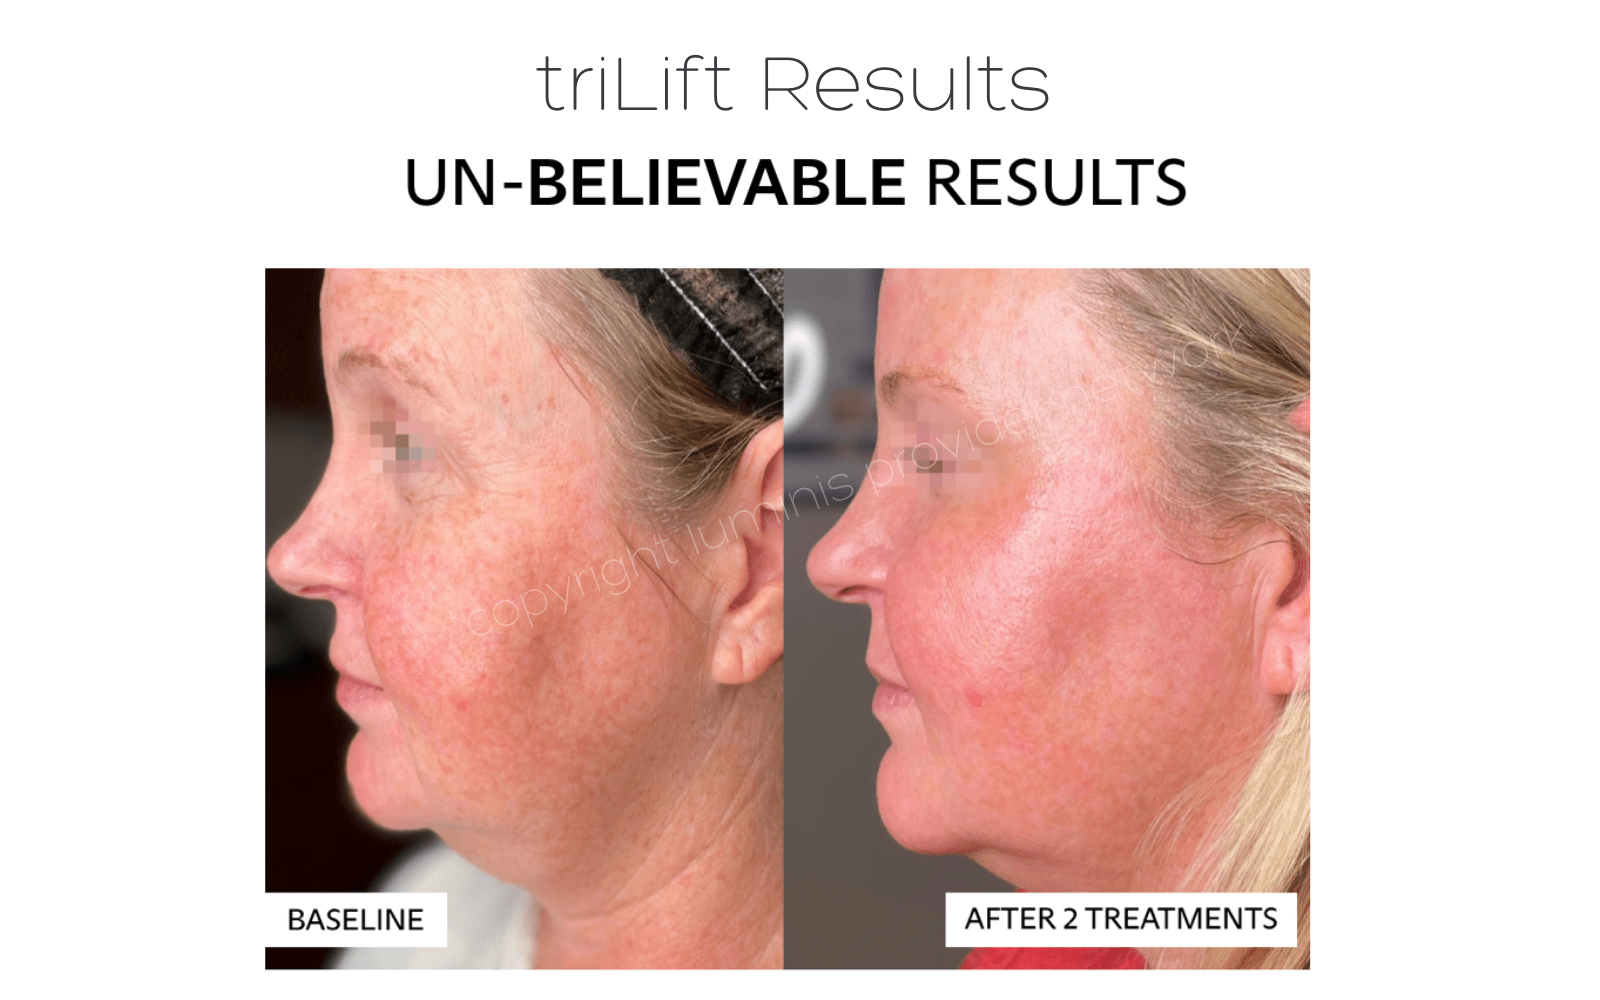 triLift results before and after 2 treatments for facial sagging